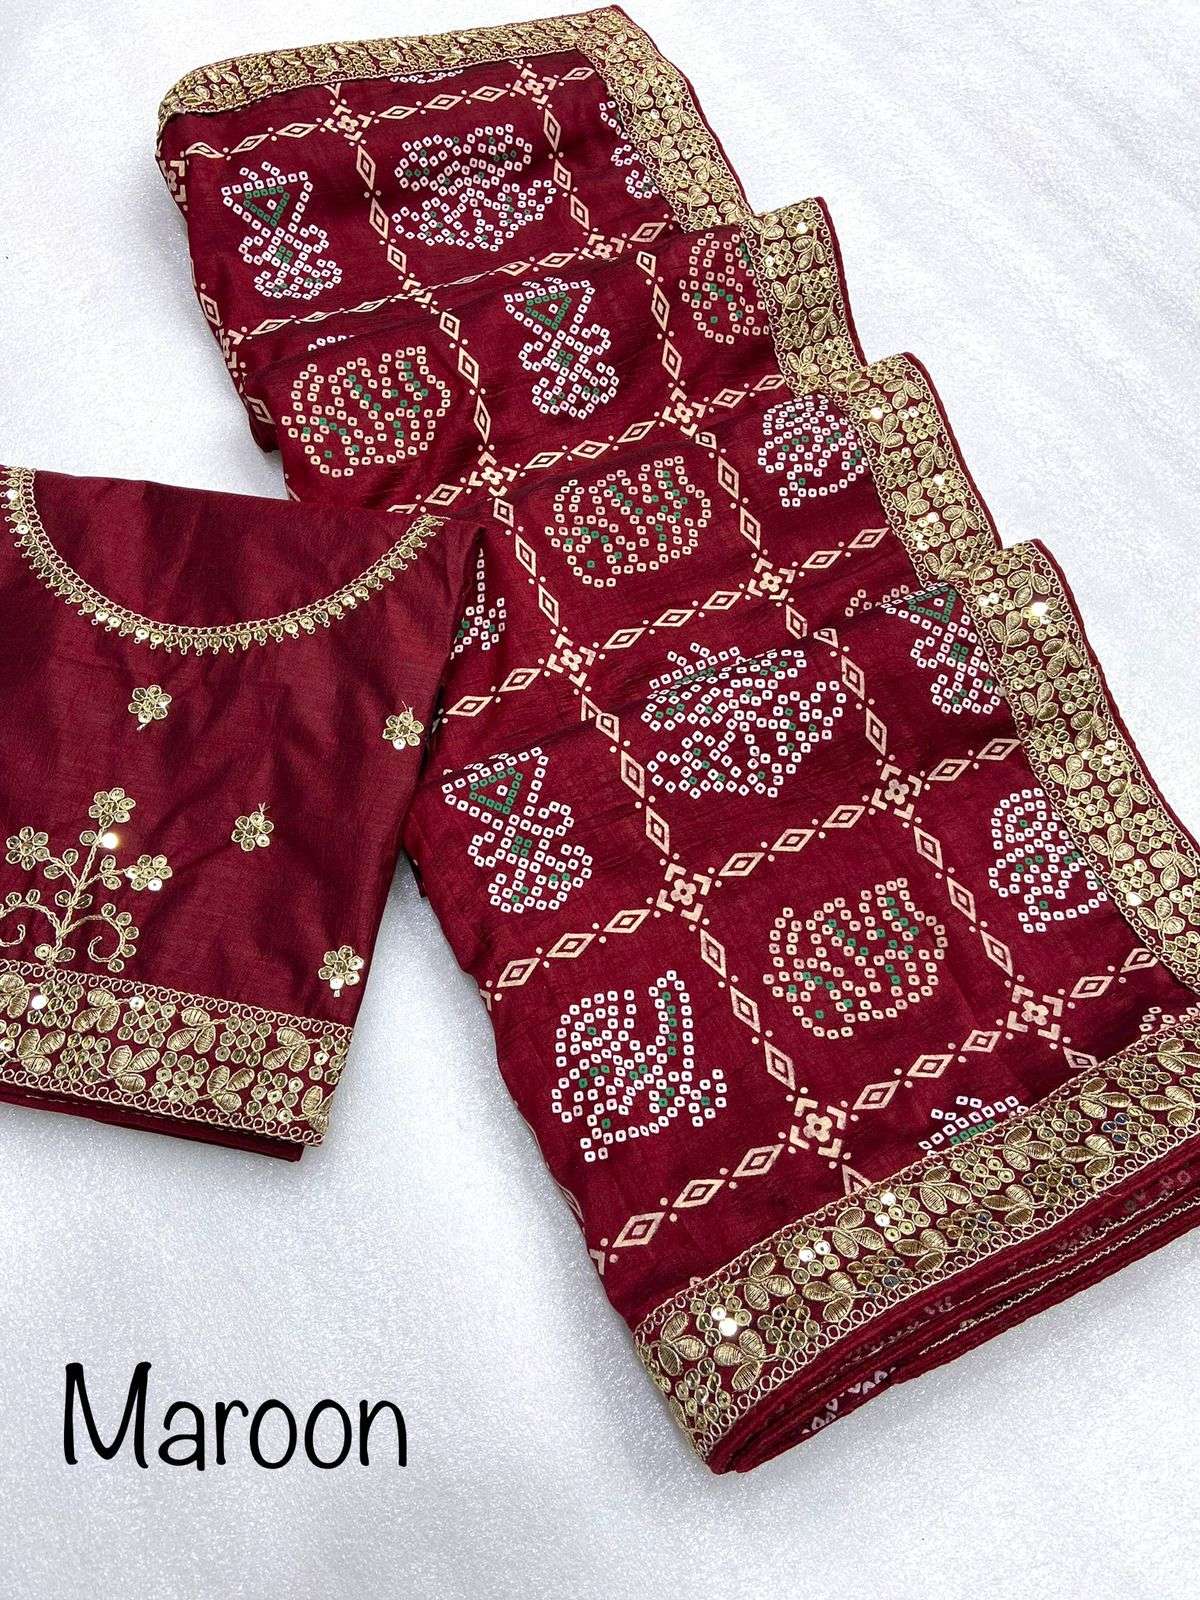 heavy vhichitra blooming saree with beautiful  khadi print in whole saree nd 5 mm seqance border with coding lace n sequence work saree 